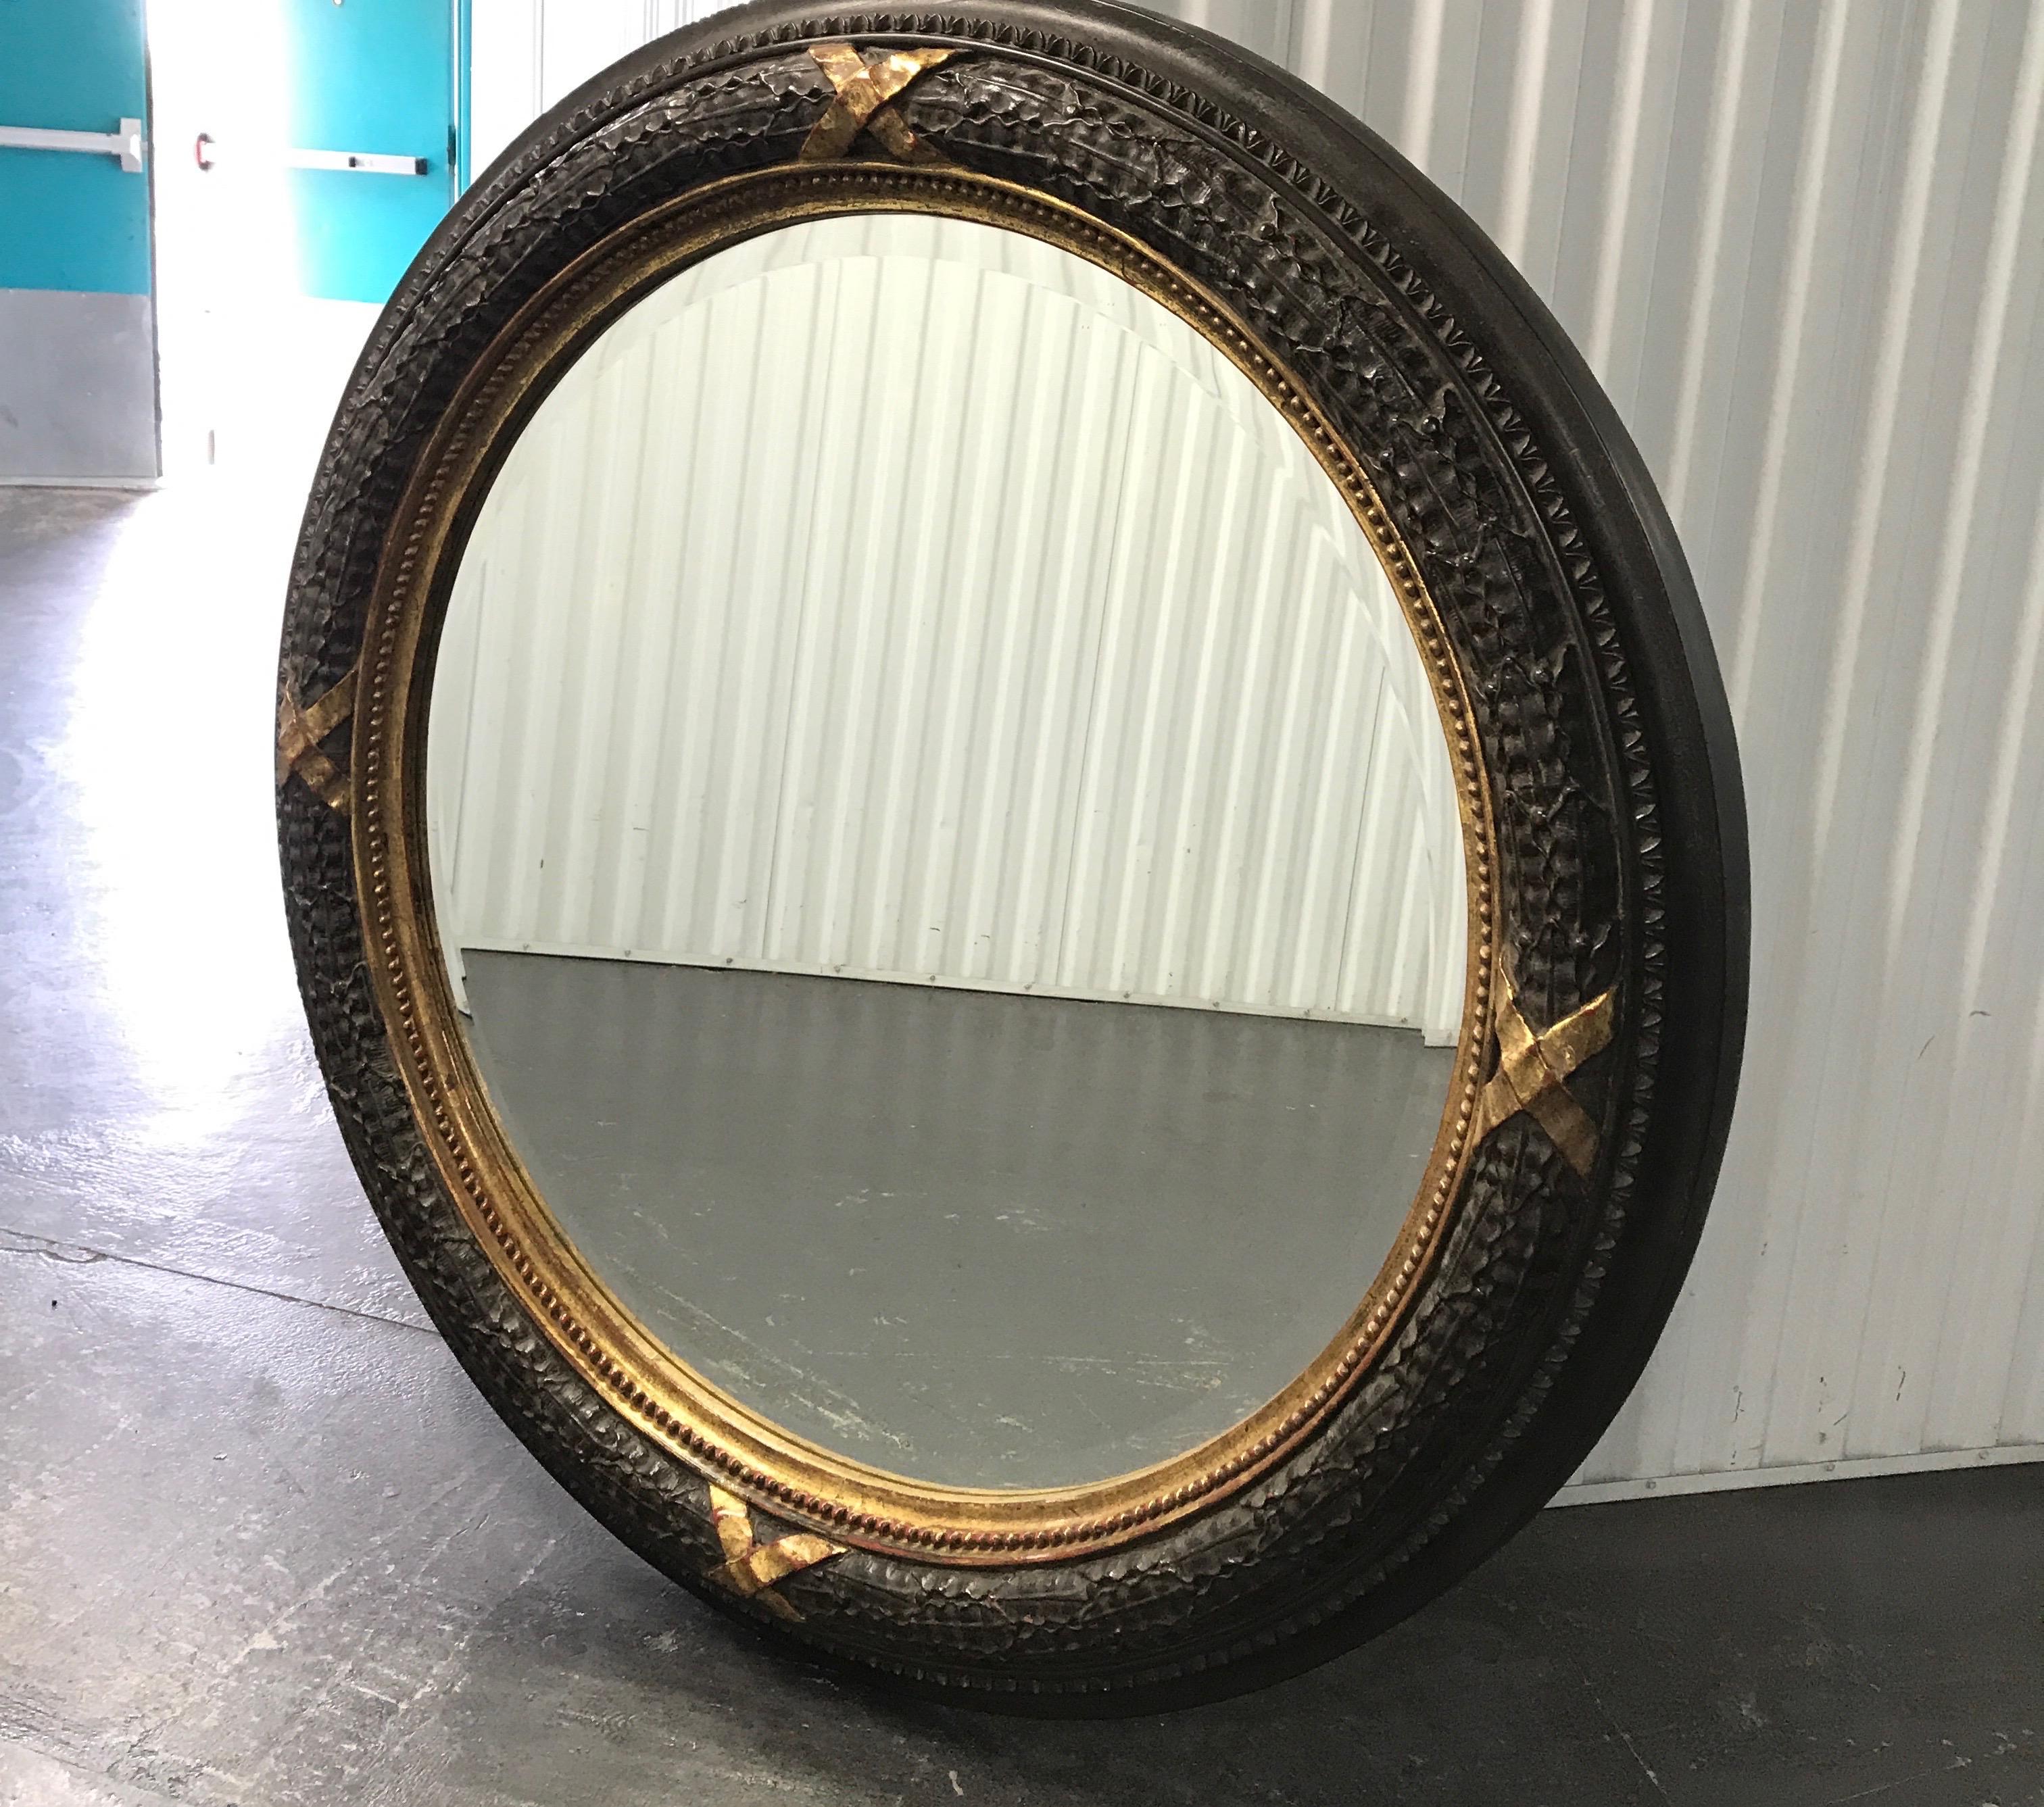 Large carved neoclassical style wood mirror with gilded trim and accents.